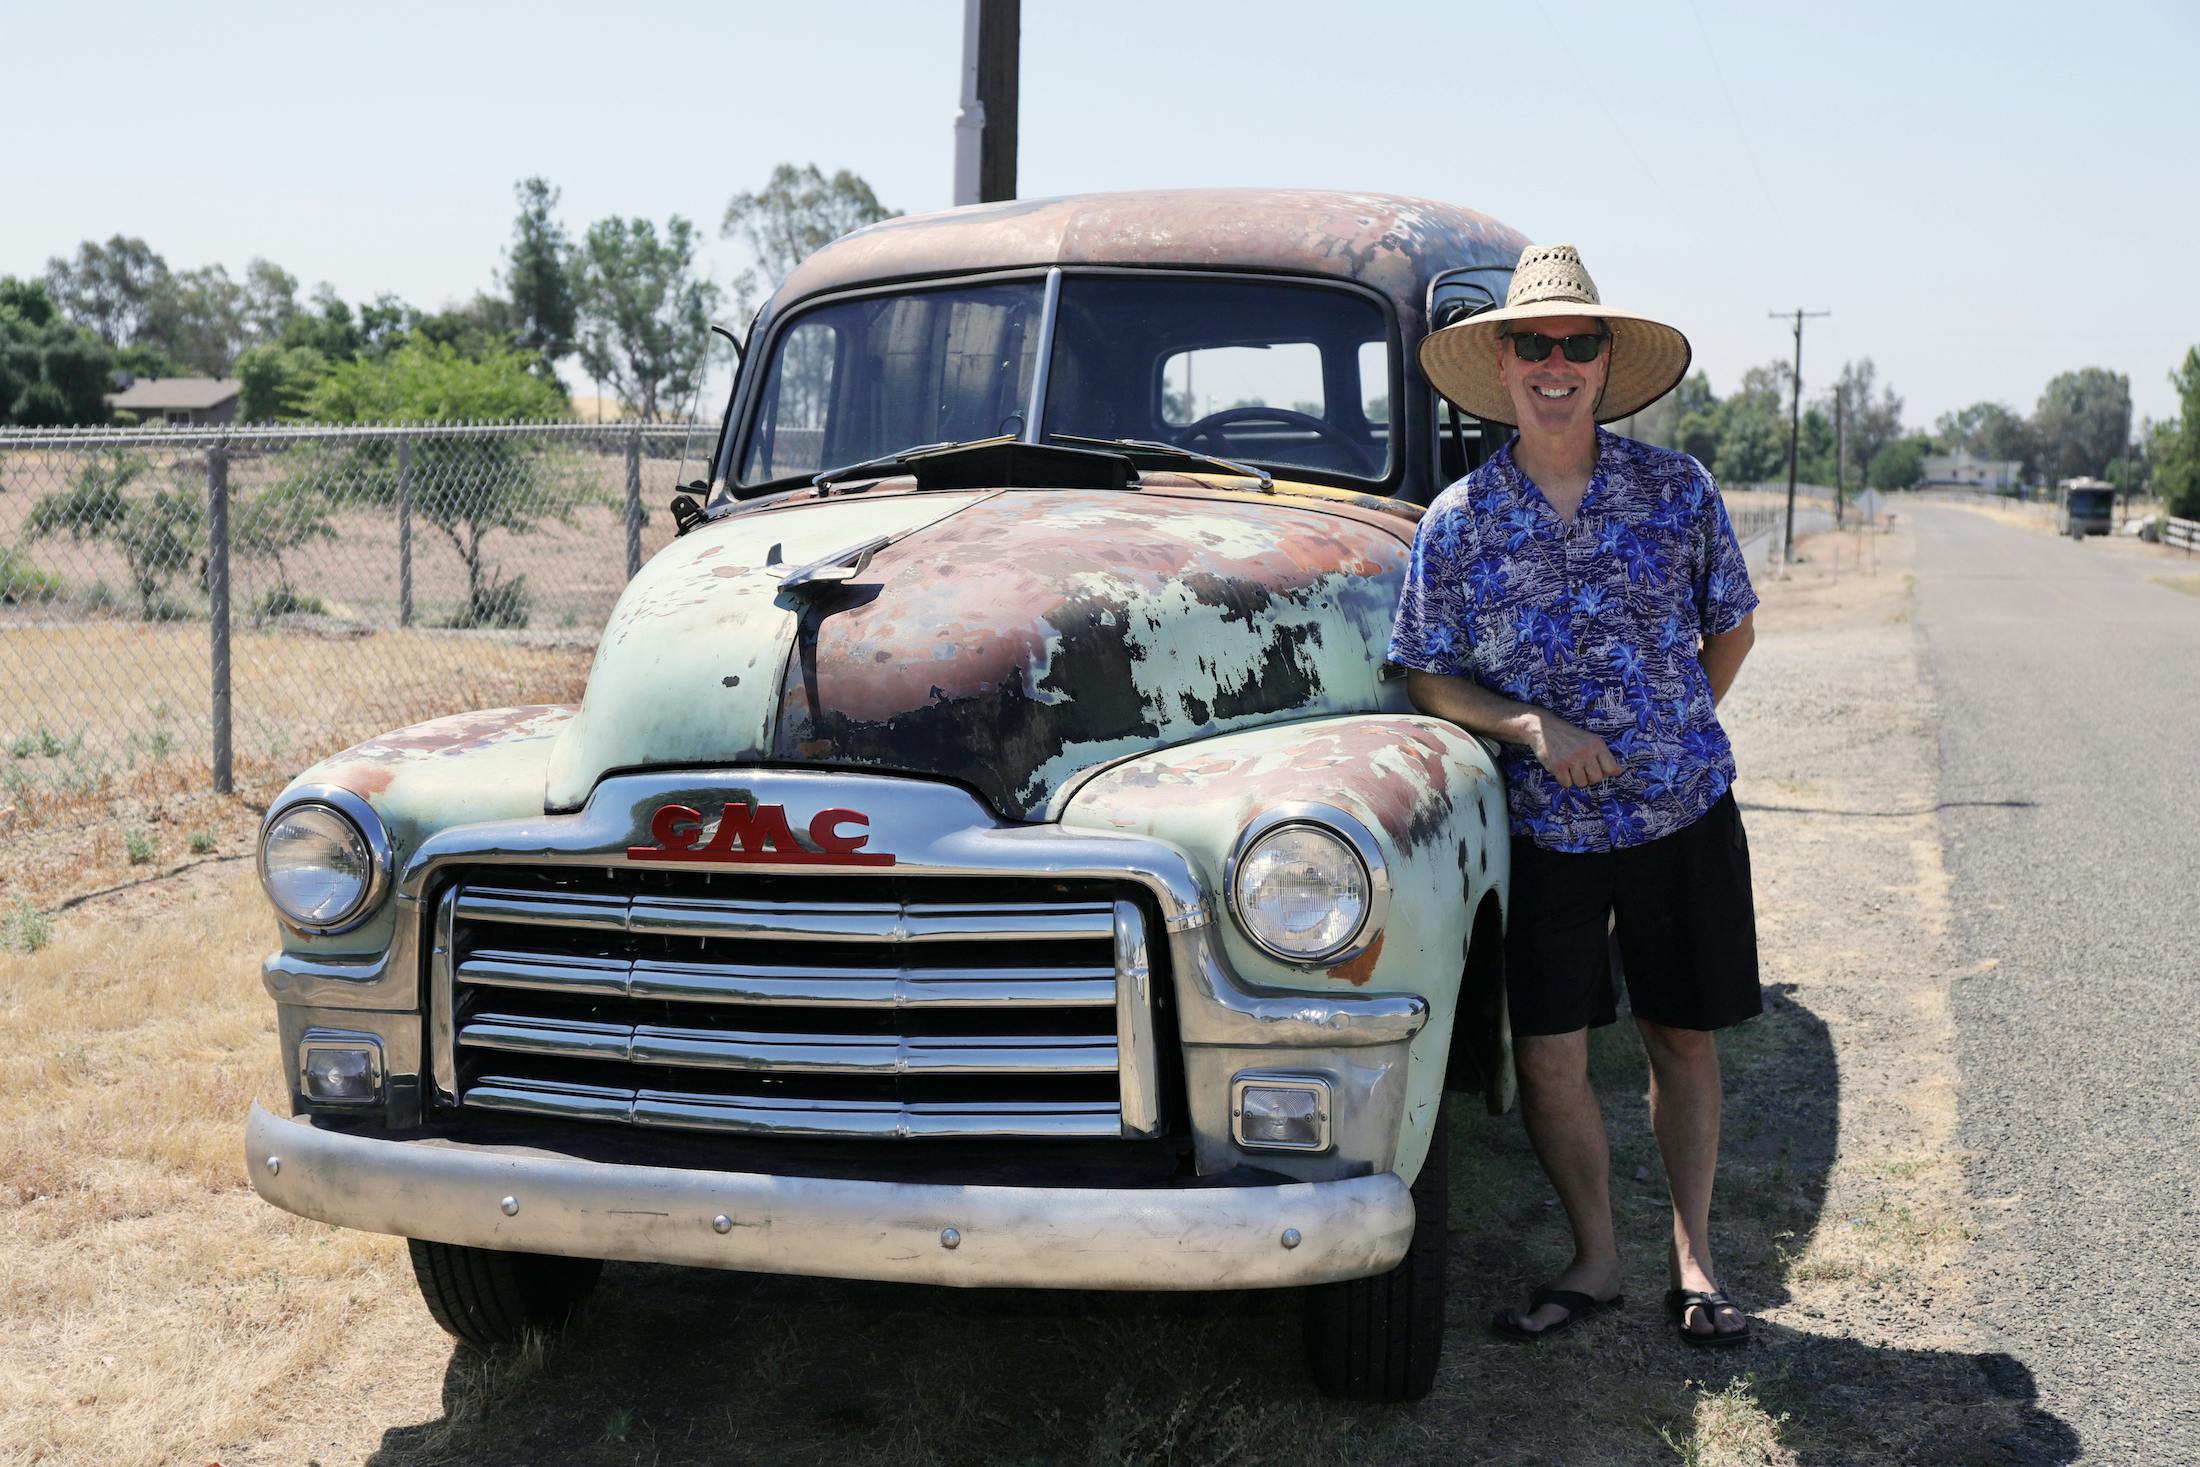 2020-07-181953 GMC 100 Panel Truck Ugly owner Nick Dounias patina owner